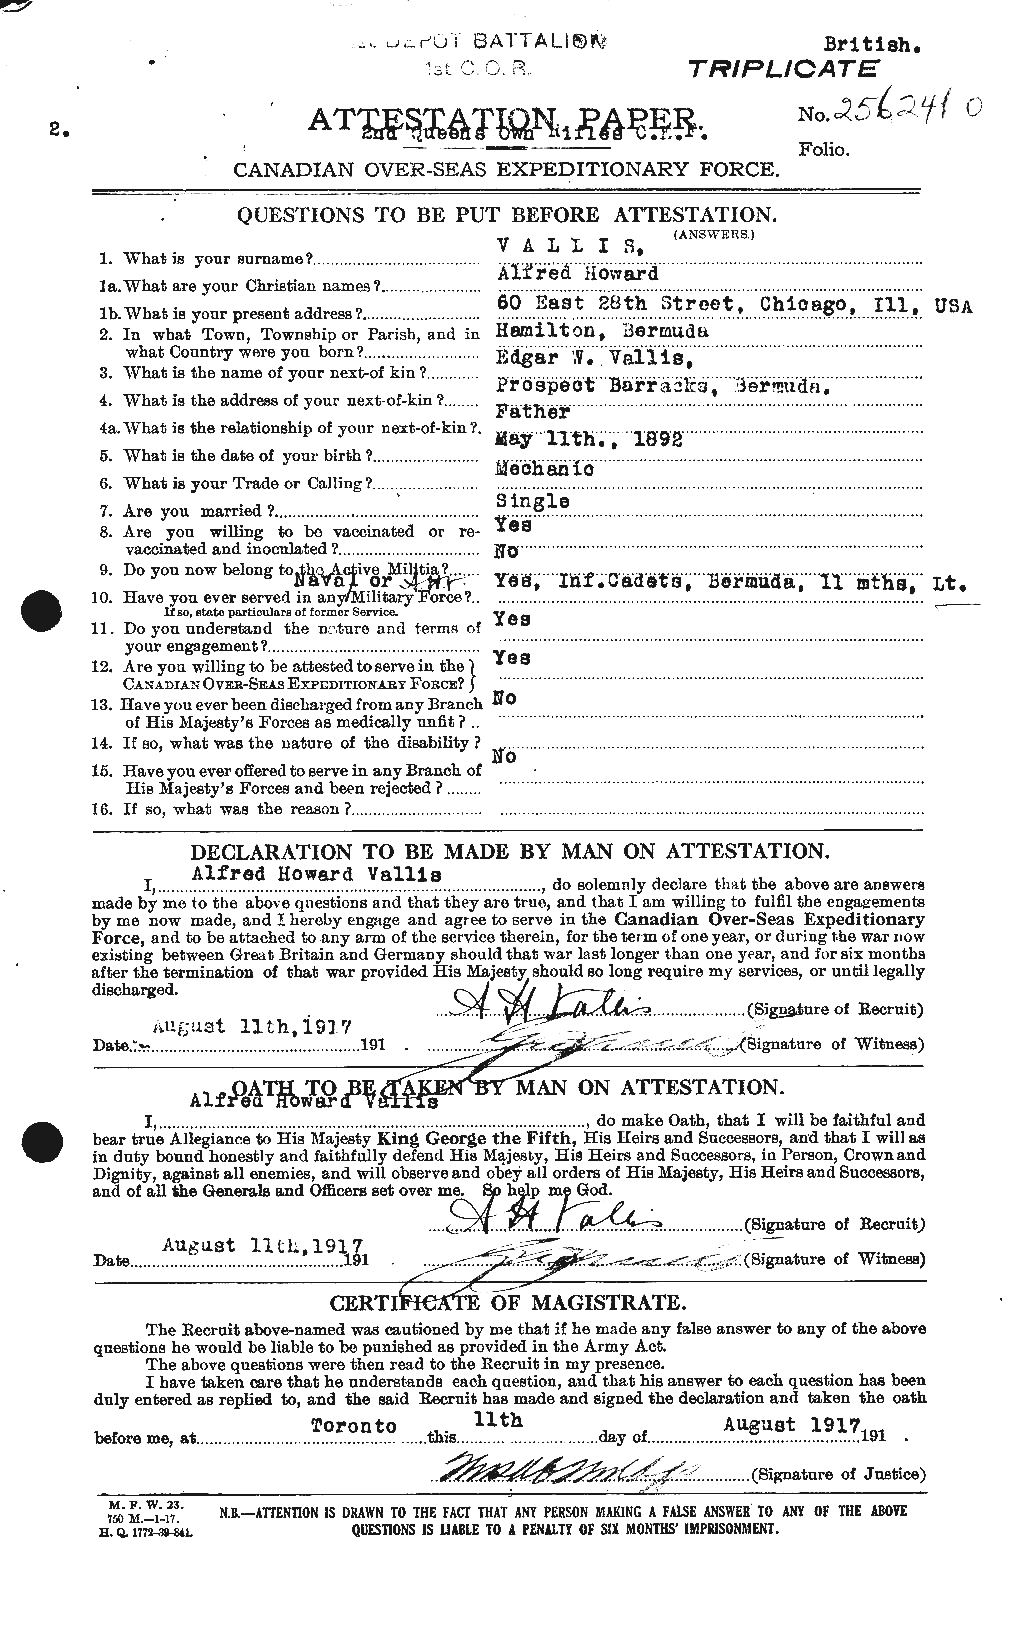 Personnel Records of the First World War - CEF 646509a